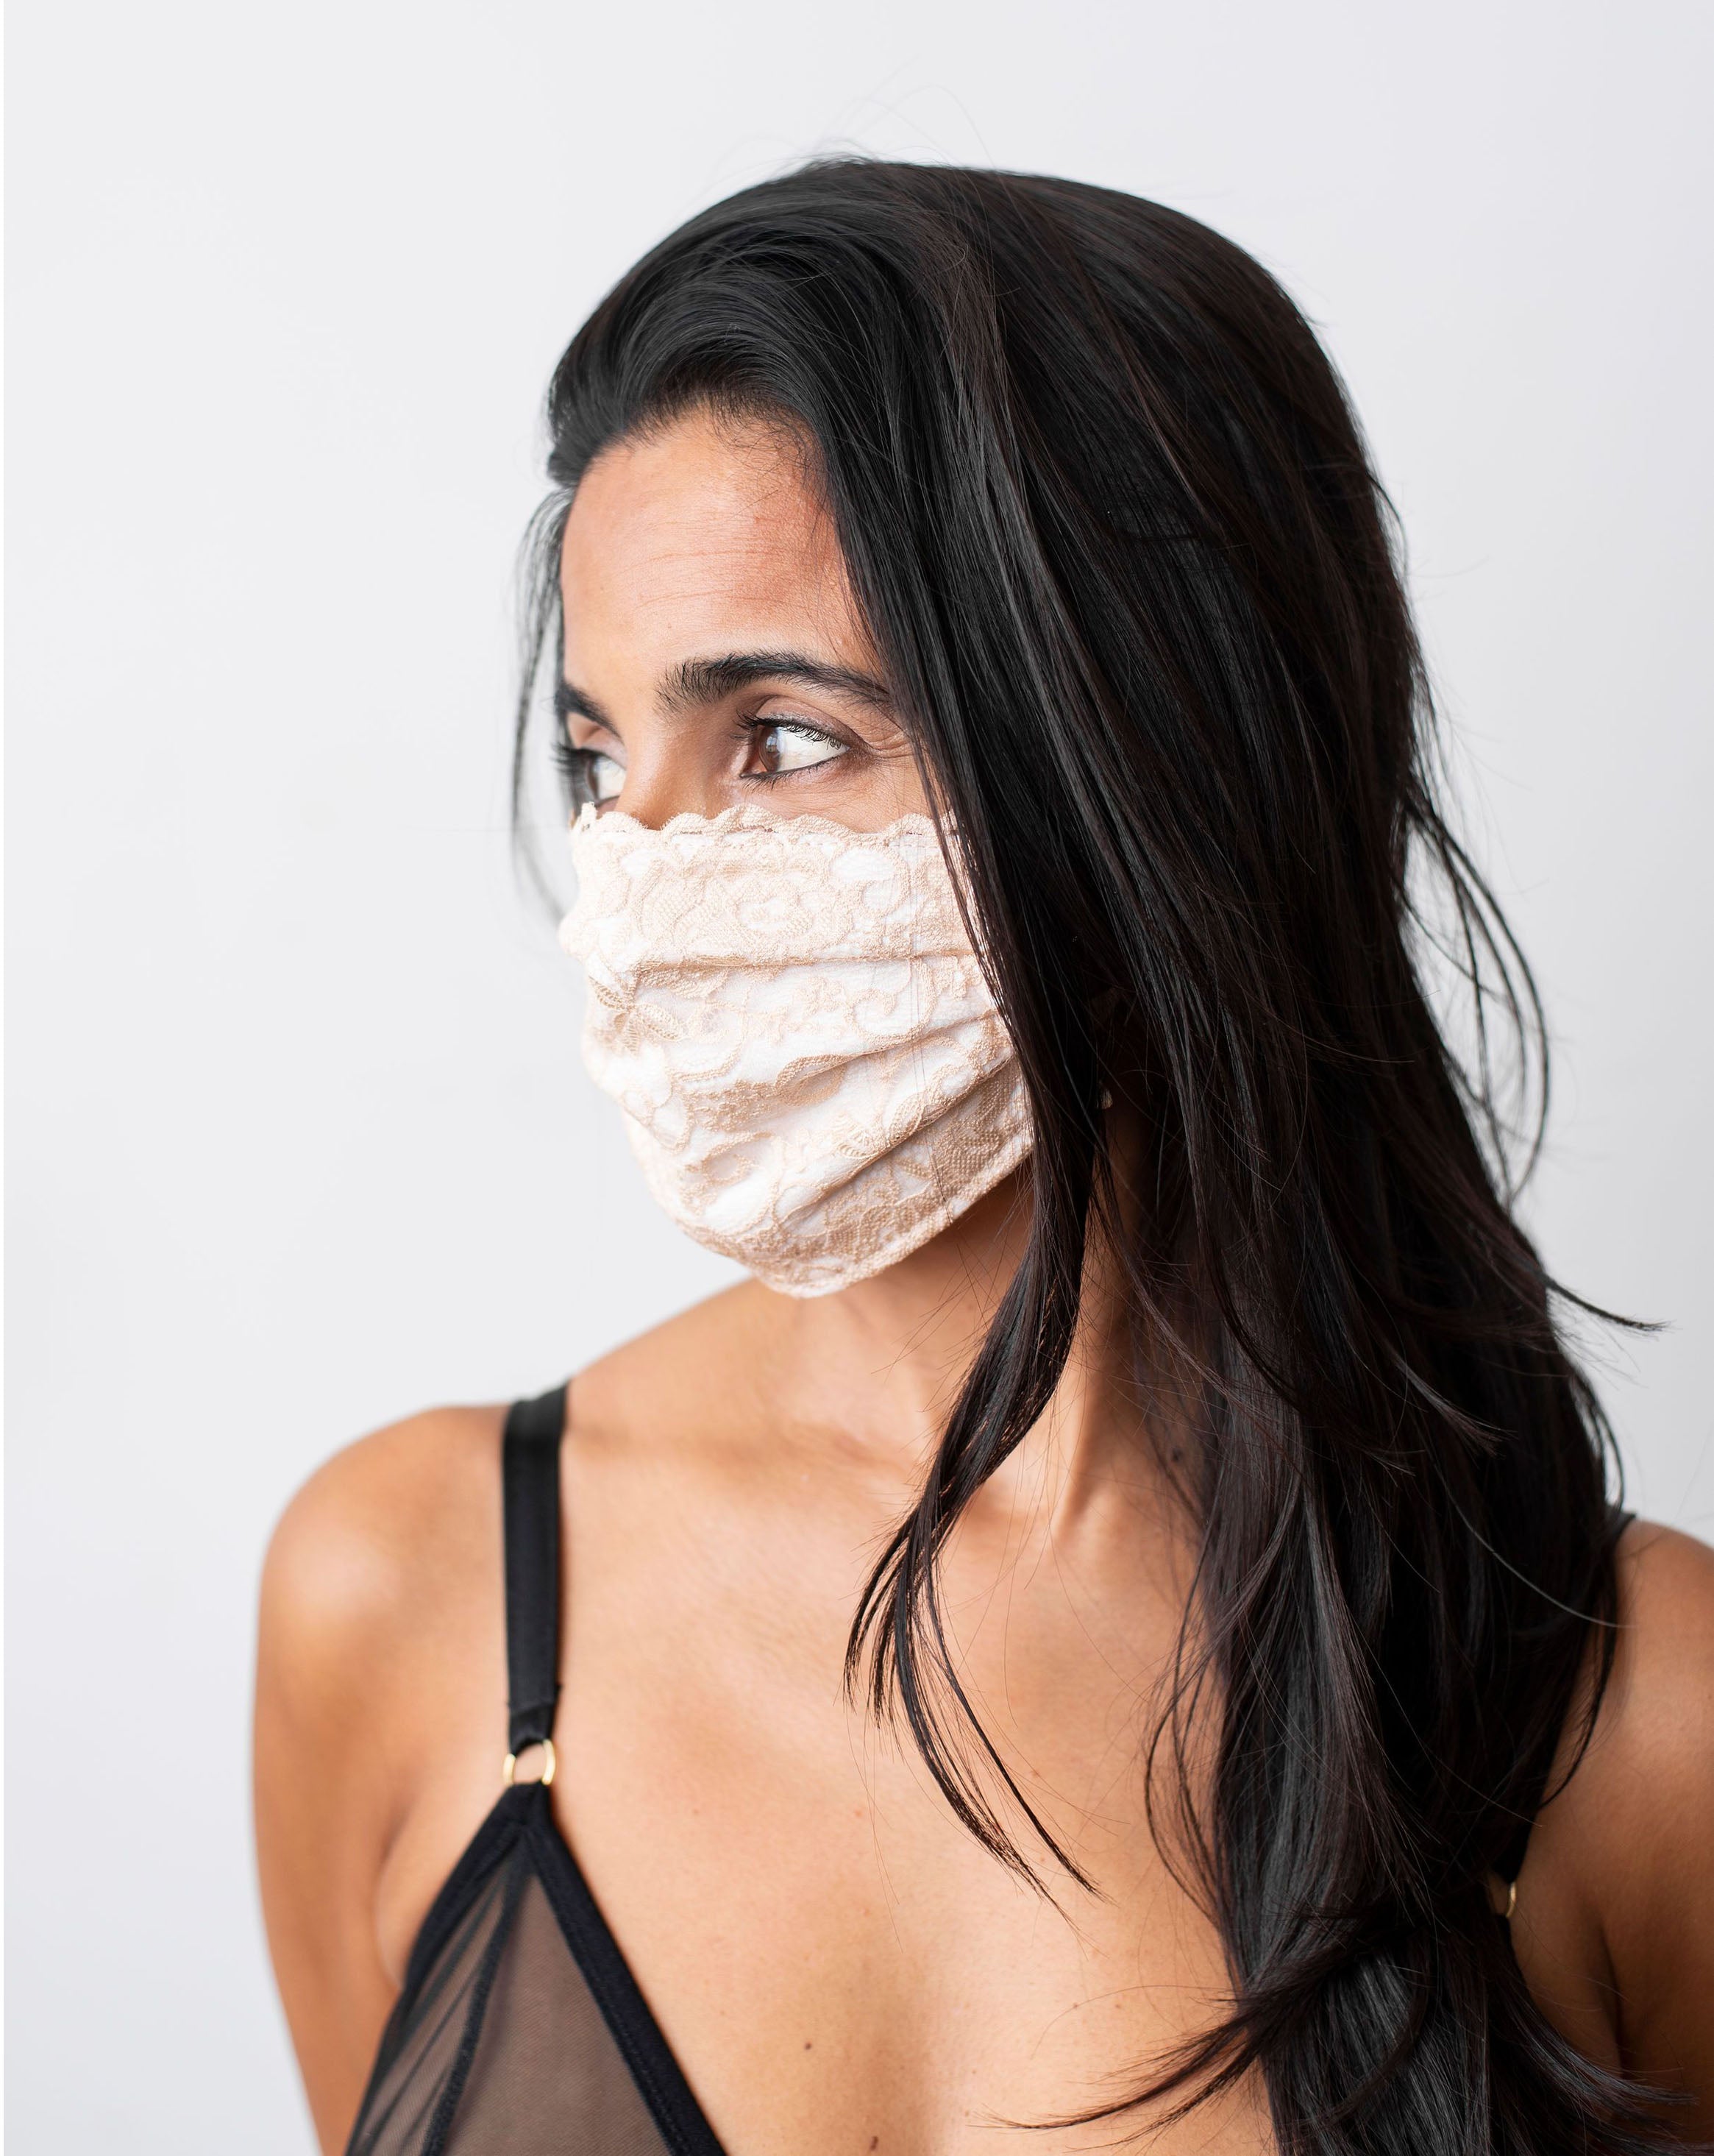 Ruhee, female with long black hair, is wearing a beige lace, organic cotton facemask. Side shot against a plain white backdrop.